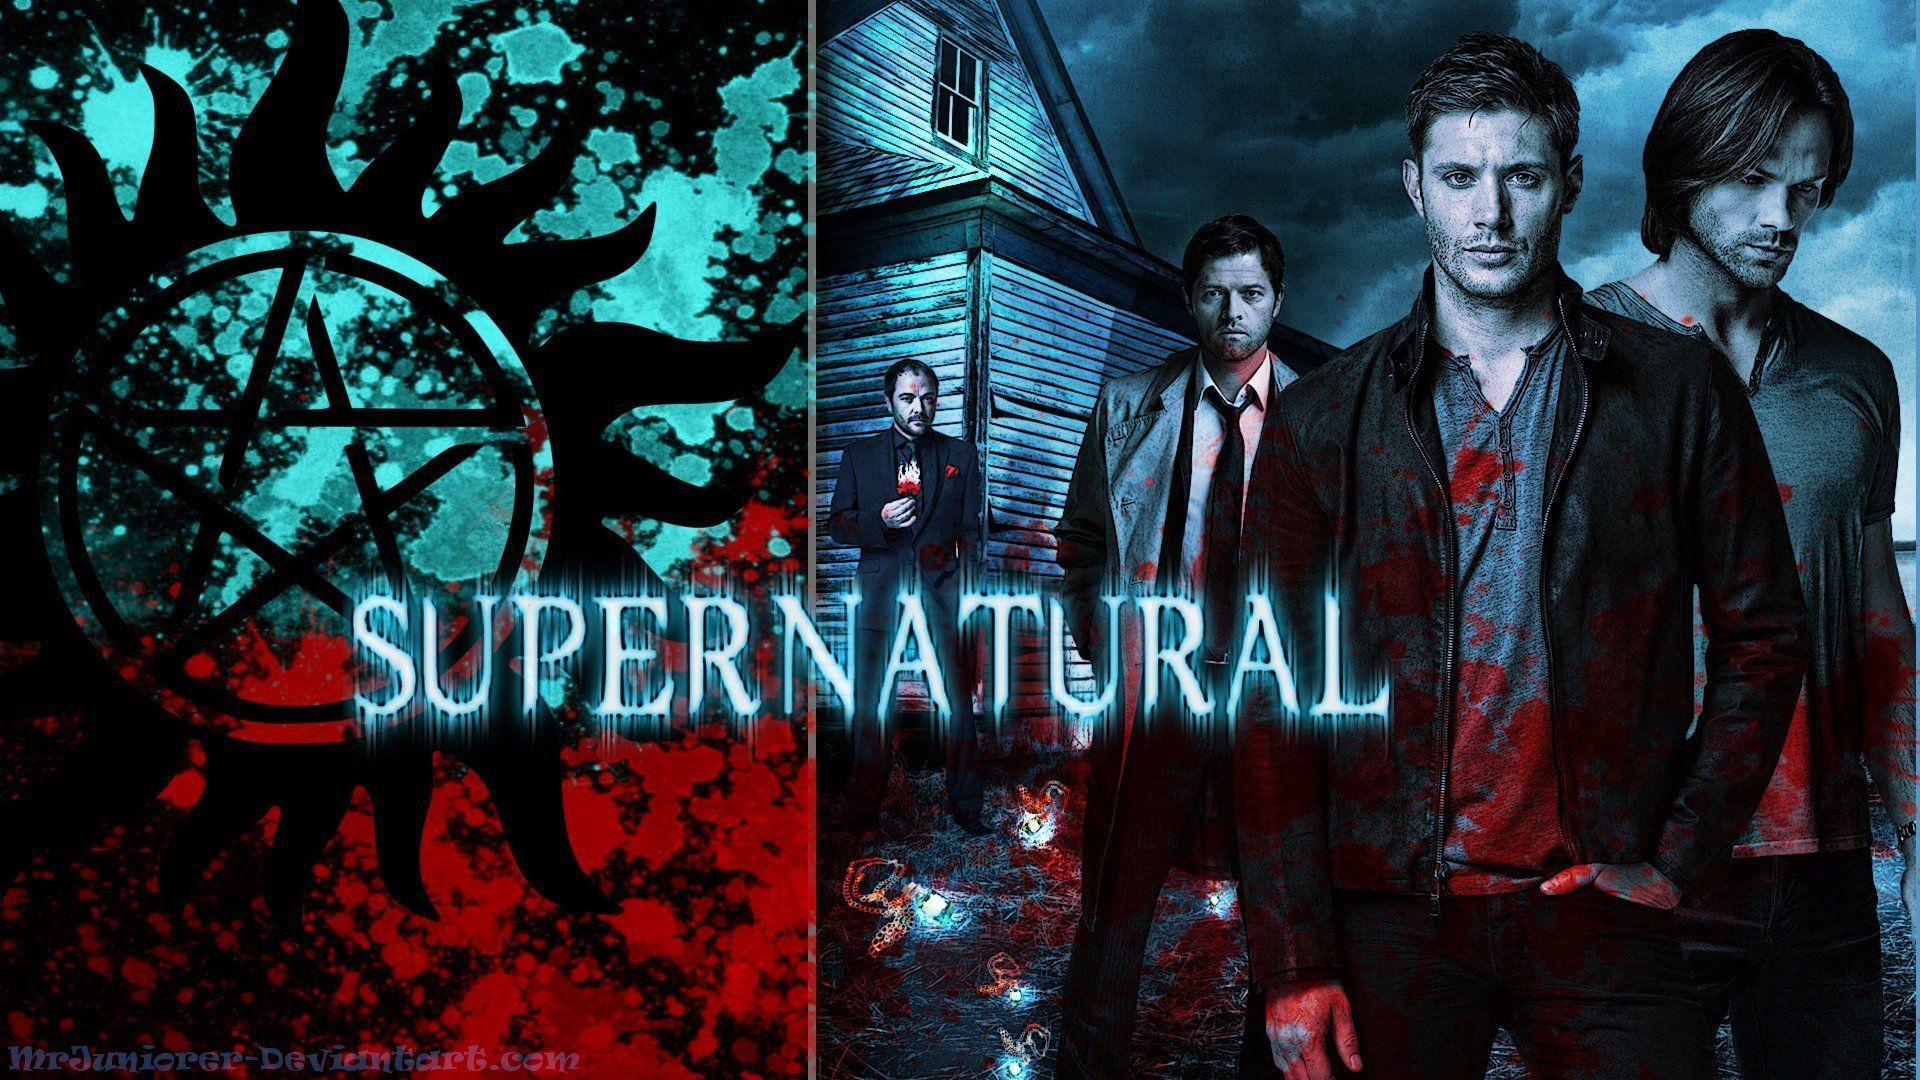 Supernatural This haunting series follows the thrilling yet